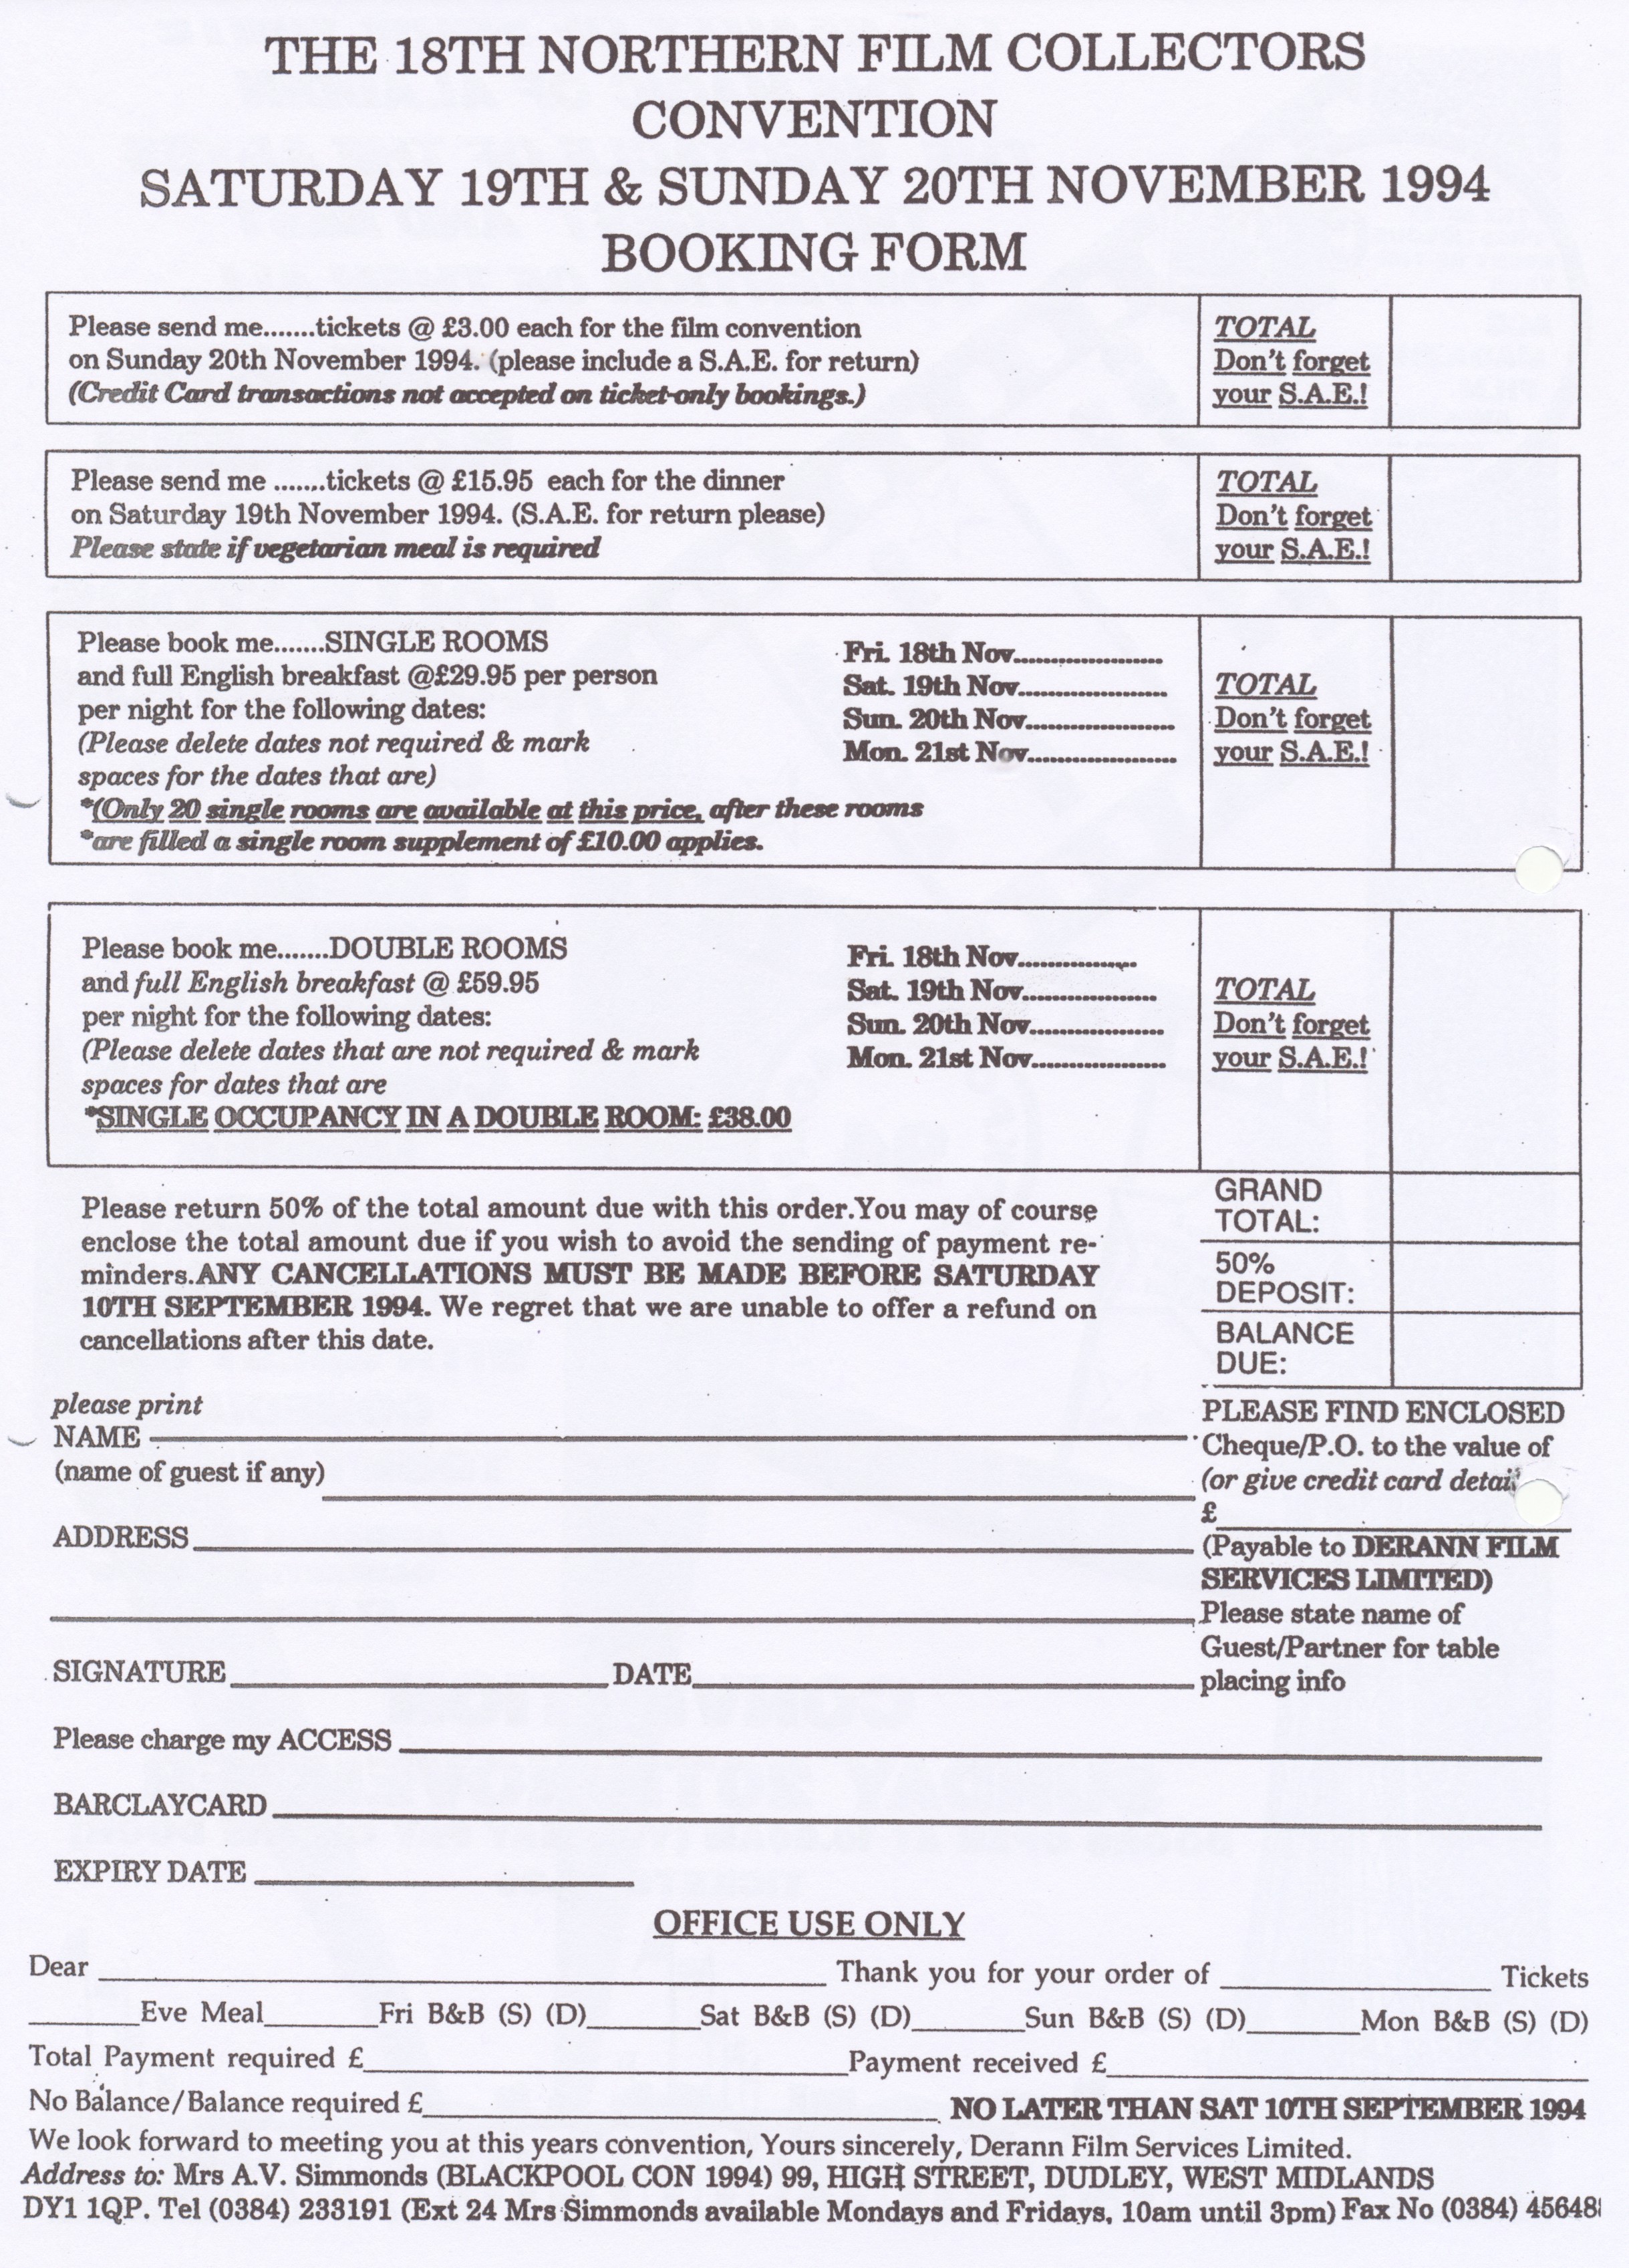 1994 Convention booking form